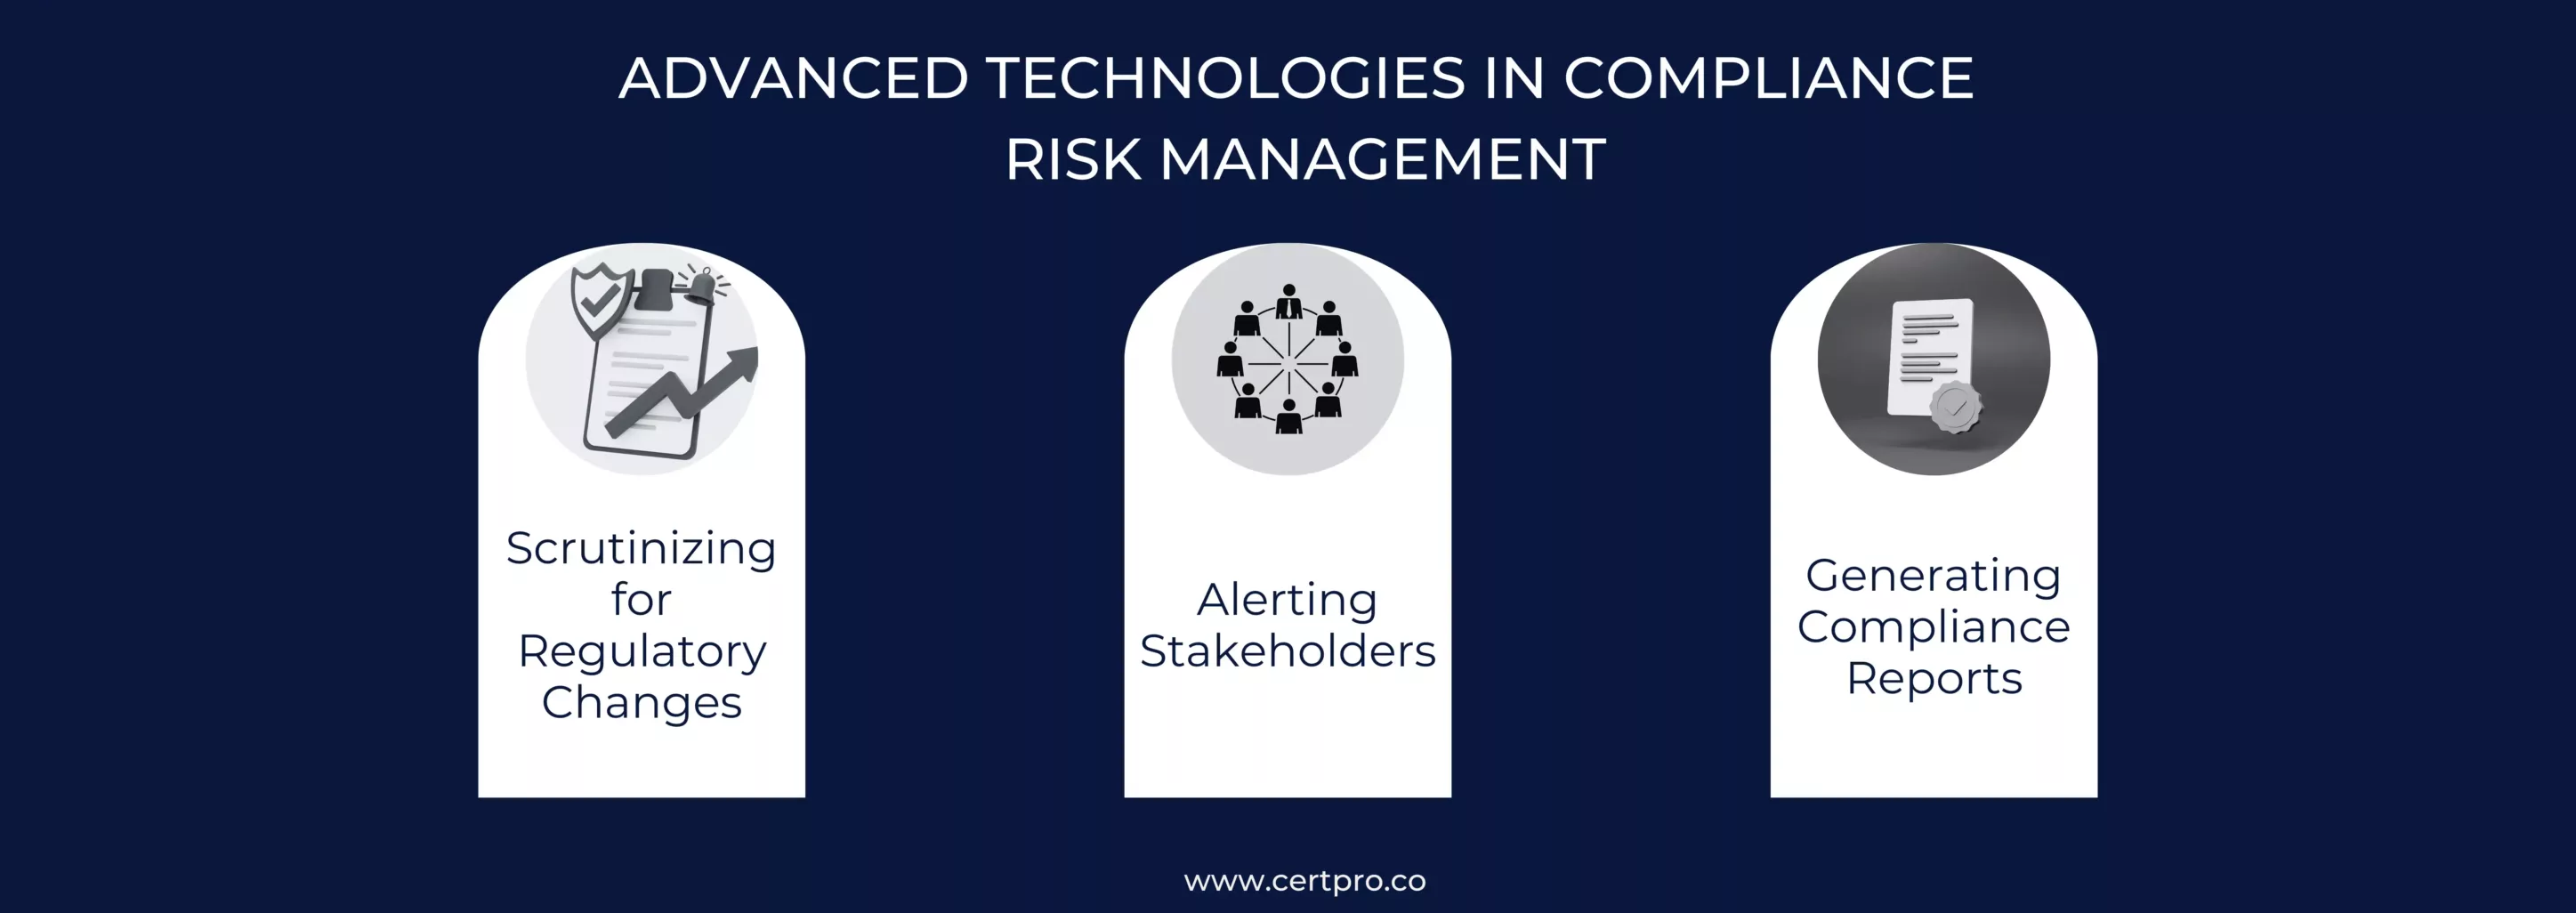 ADVANCED TECHNOLOGIES IN COMPLIANCE RISK MANAGEMENT